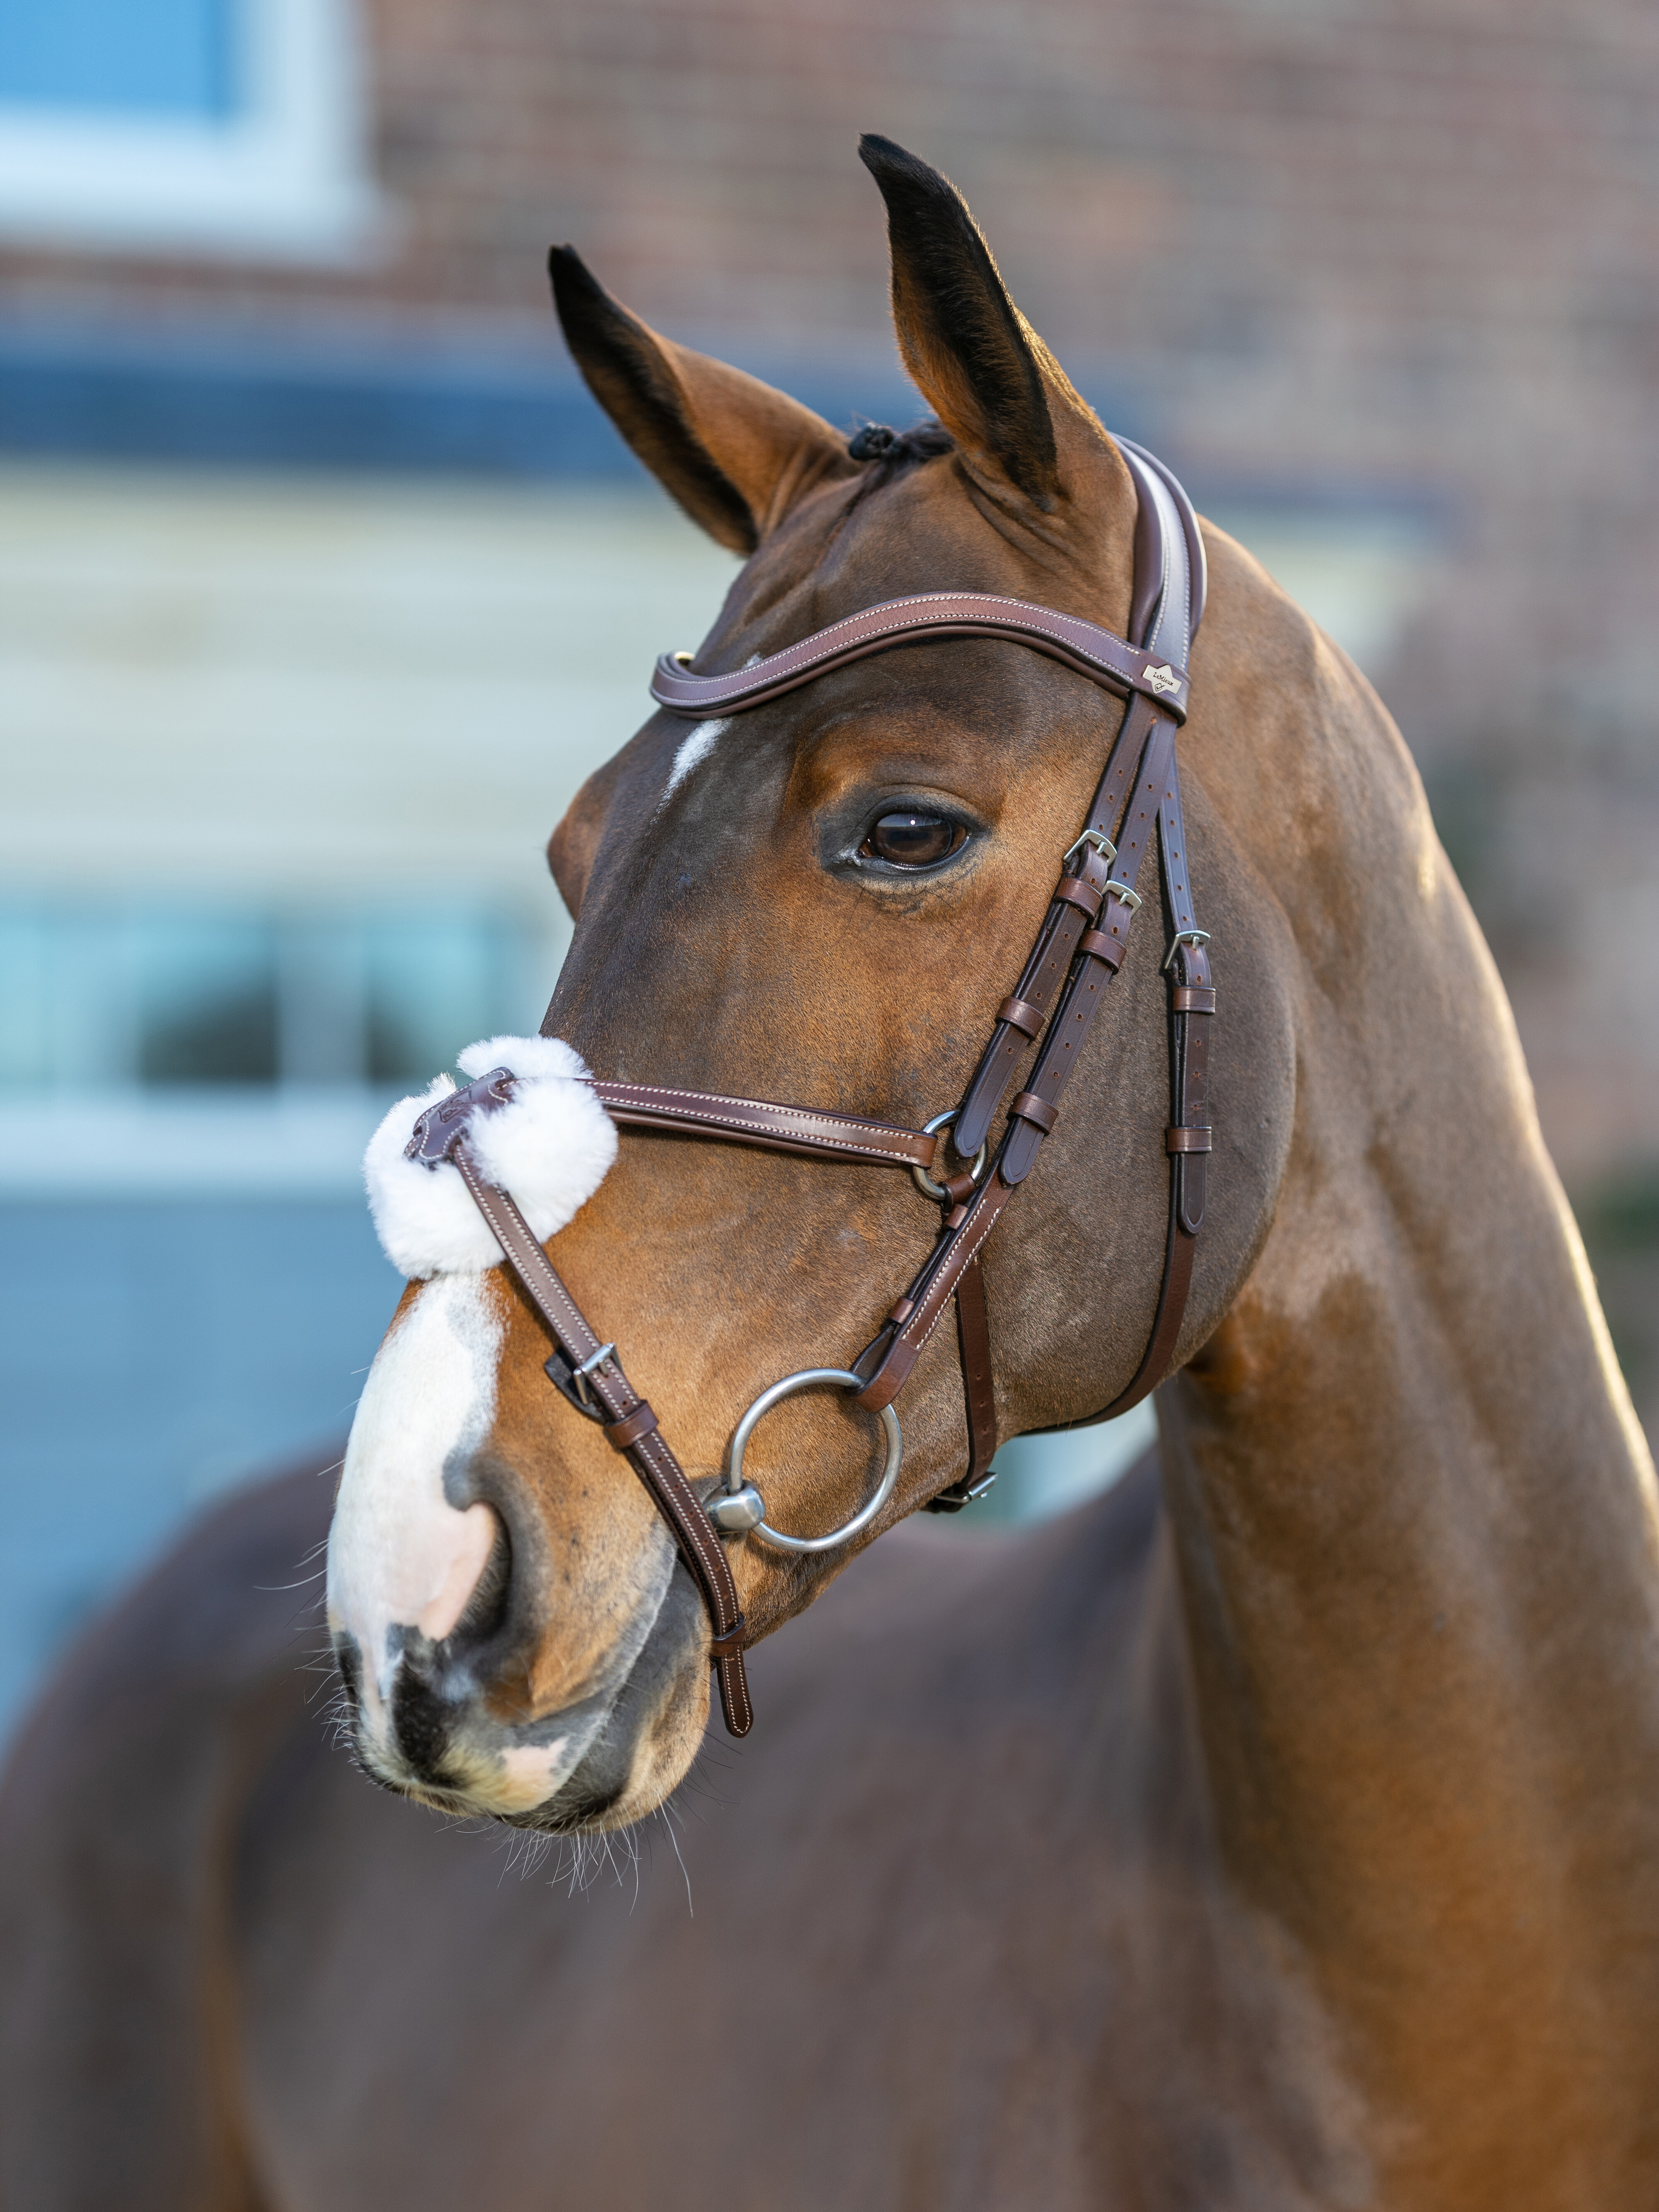 Shop Our Wide Selection of Quality Bridle Reins